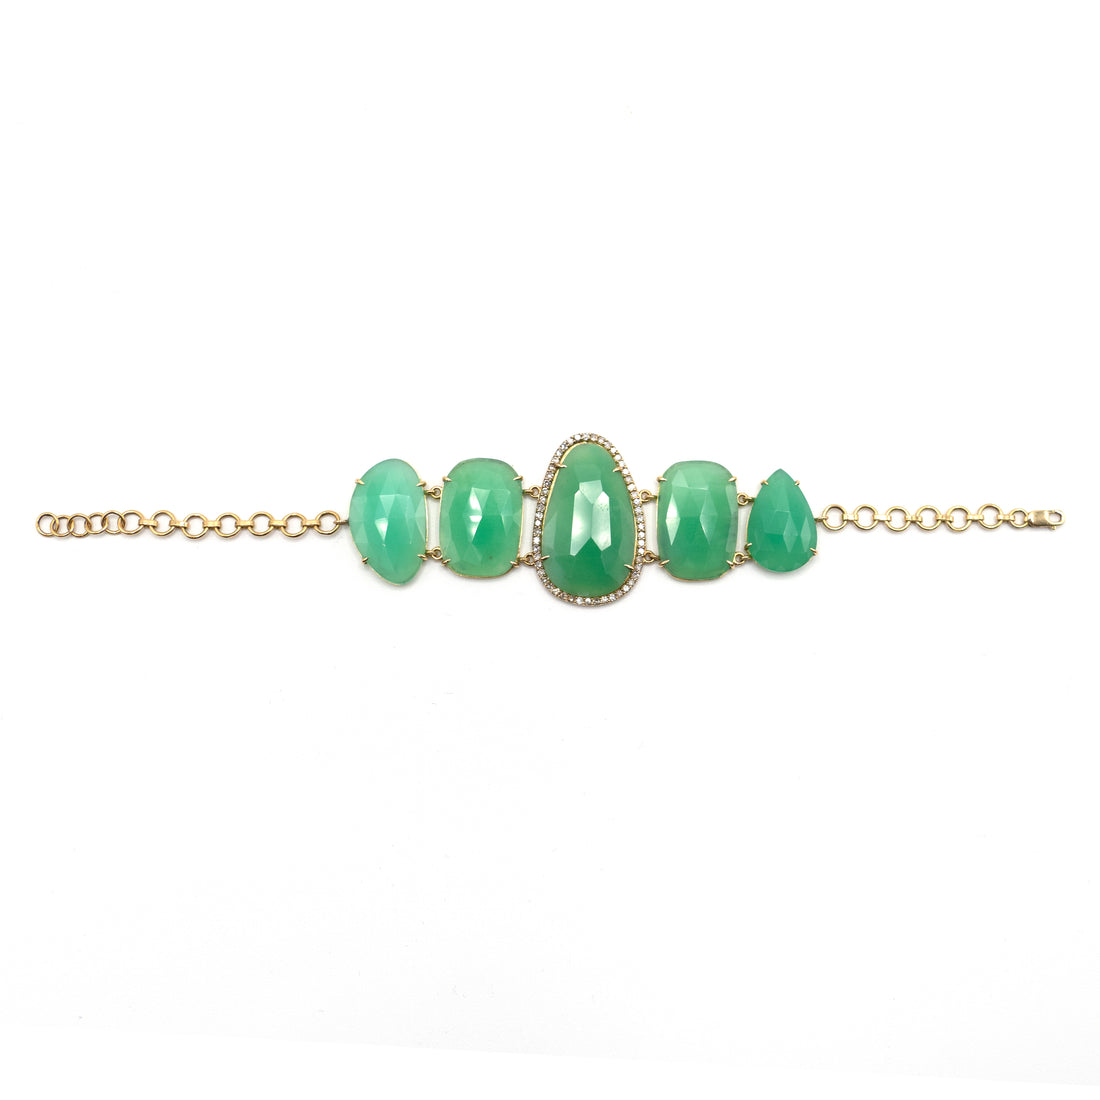 Green Opal Bracelet with 18 kt Gold and Diamonds